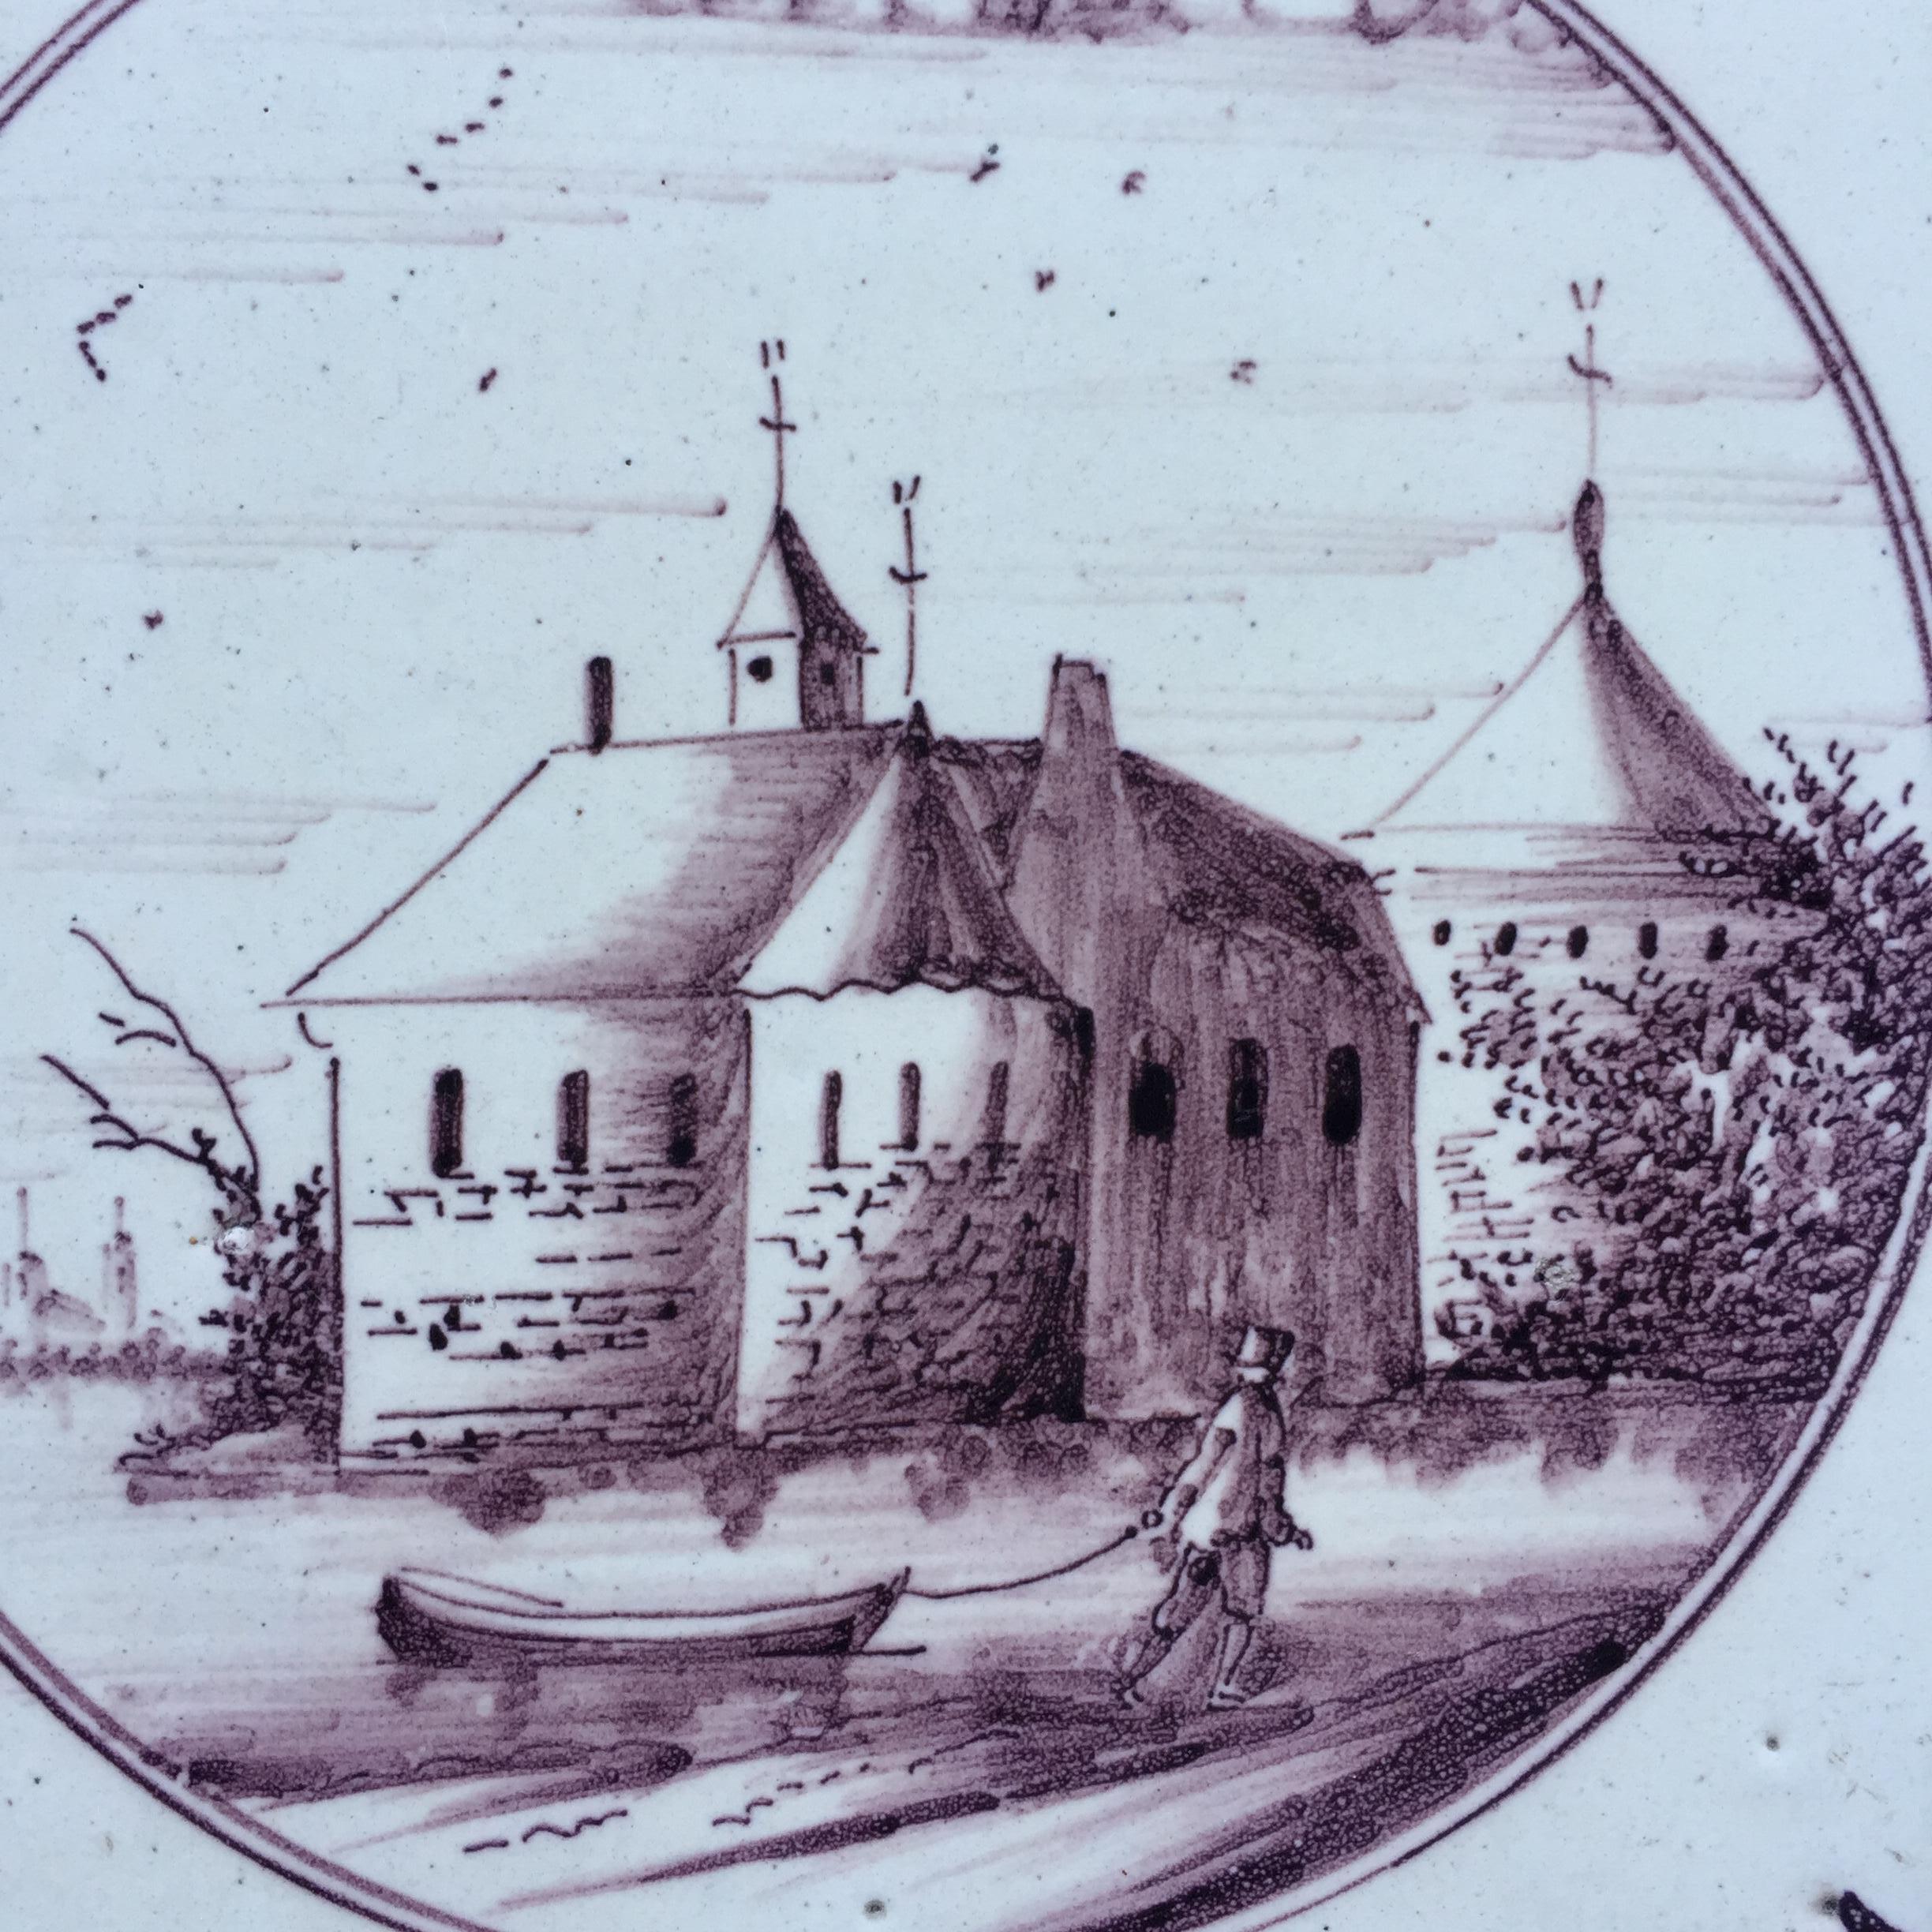 The Netherlands
Amsterdam
1800 – 1825

An unusual landscape tile with the decoration of a castle at a river with in the front a man with a boat, painted within a circle. With a very small corner decoration of a quarter of a star.

The tile is in